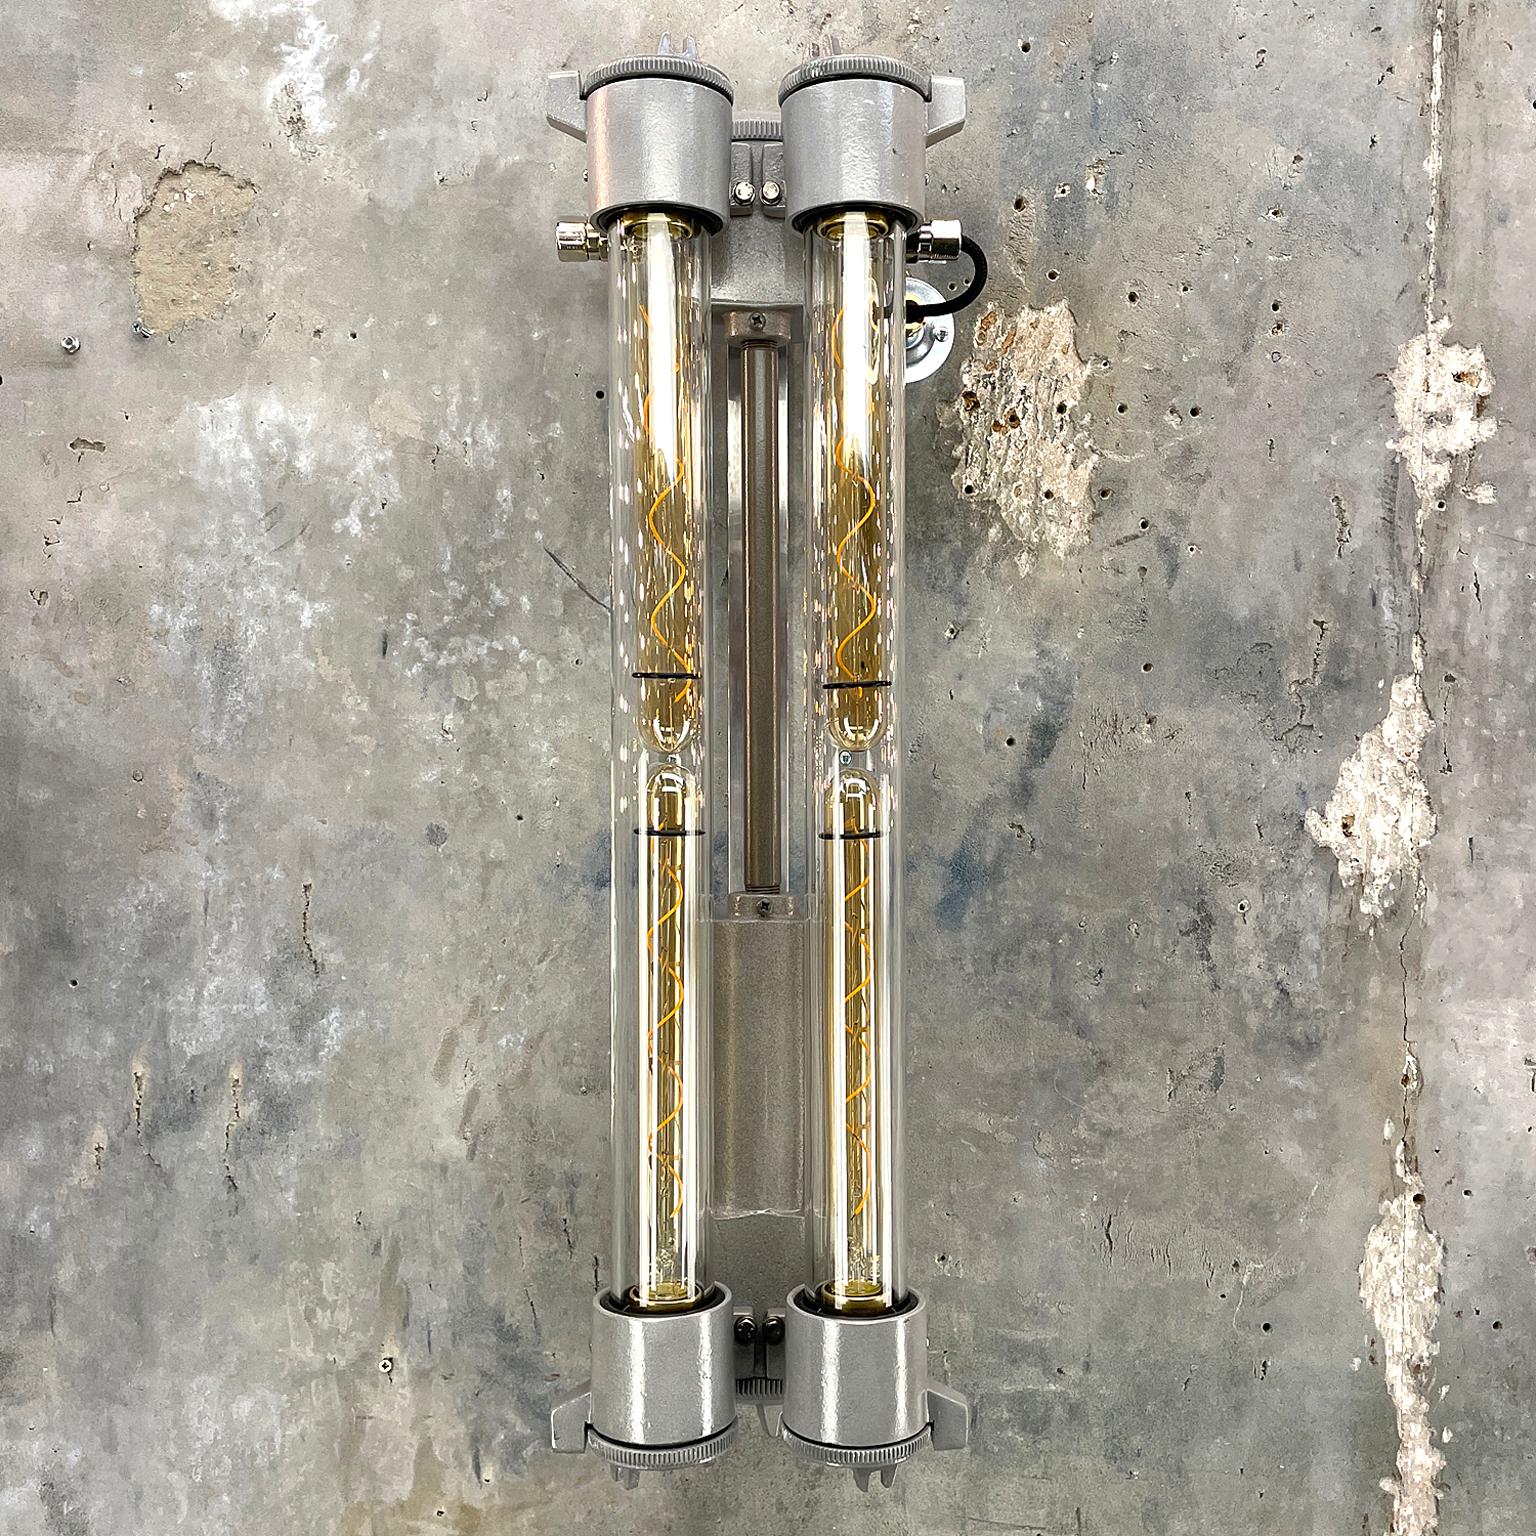 A retro Industrial aluminium flameproof wall-mounted twin LED tube strip light by Daeyang.

Originally these lights were manufactured circa 1970 for NATO vessels. Reclaimed and professionally restored by hand in UK by Loomlight to modern lighting